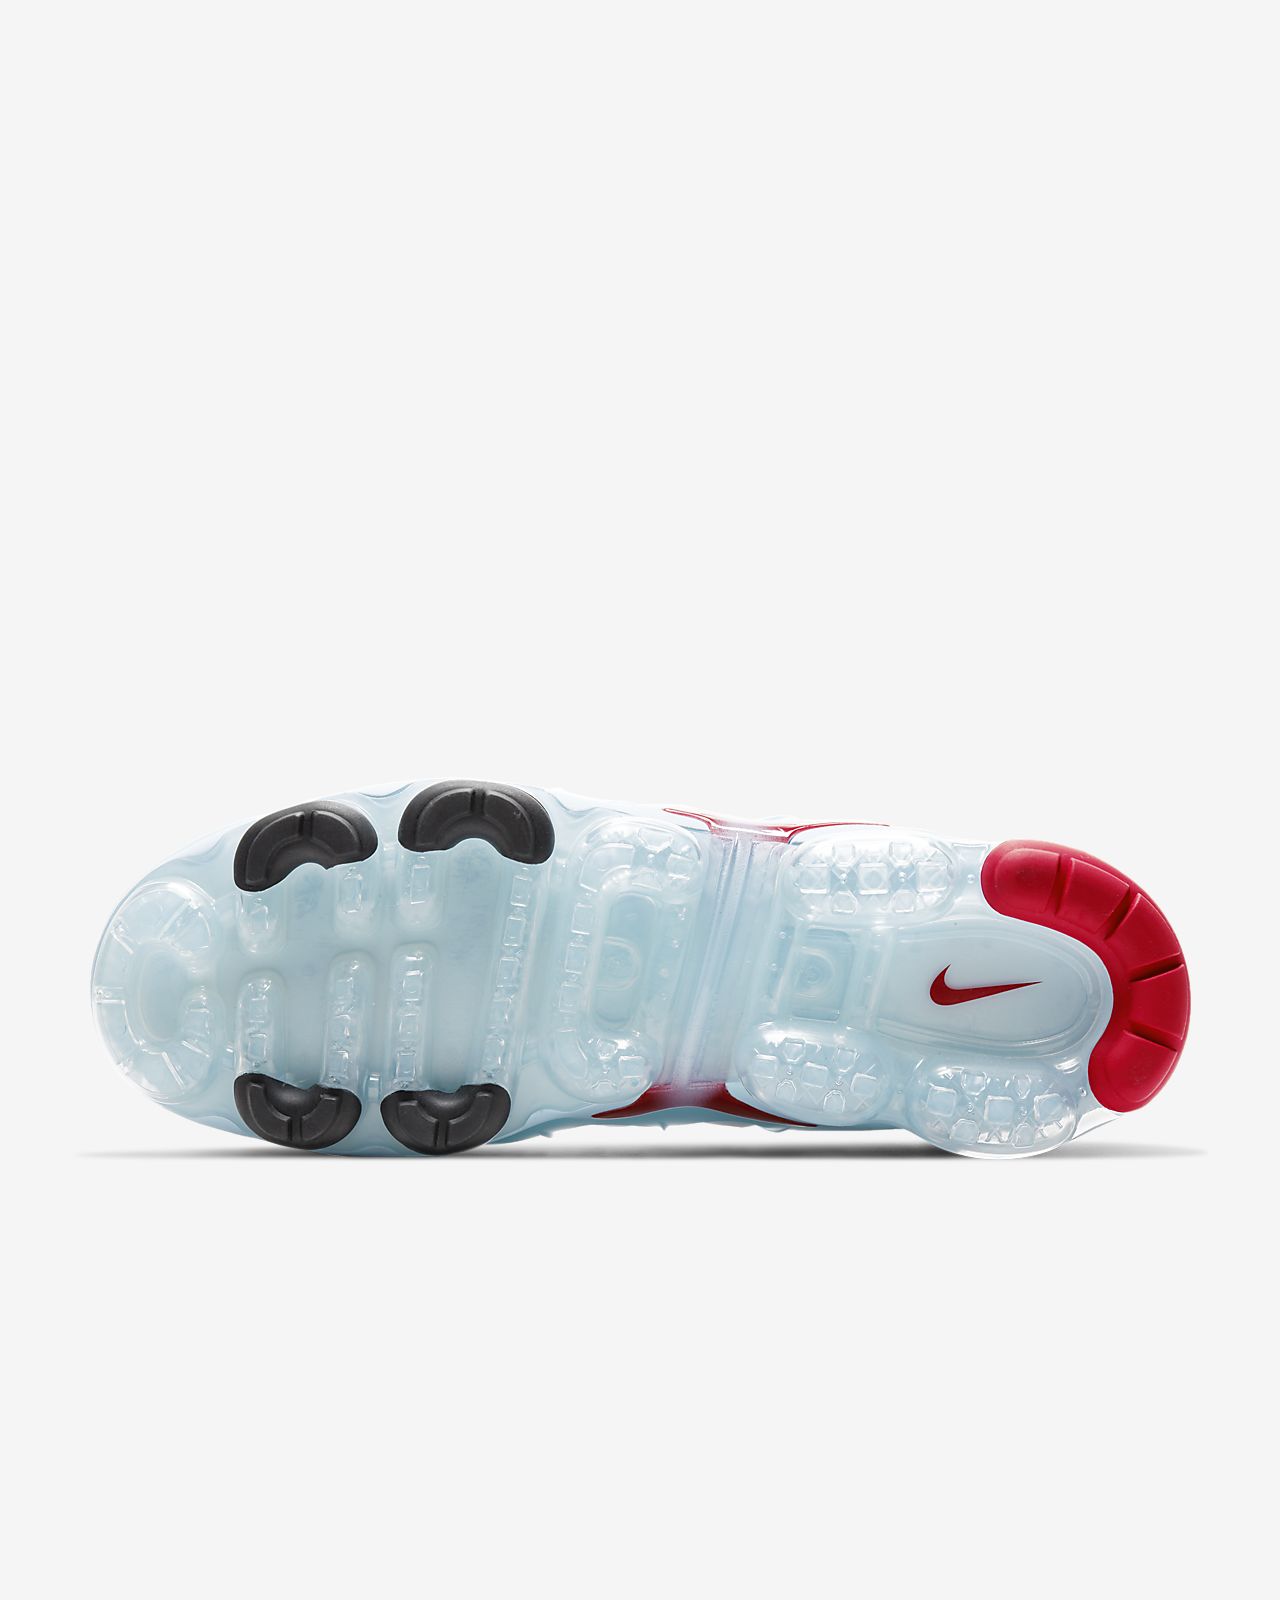 Notice Nike Air Vapormax TN Plus Overbranded Black White